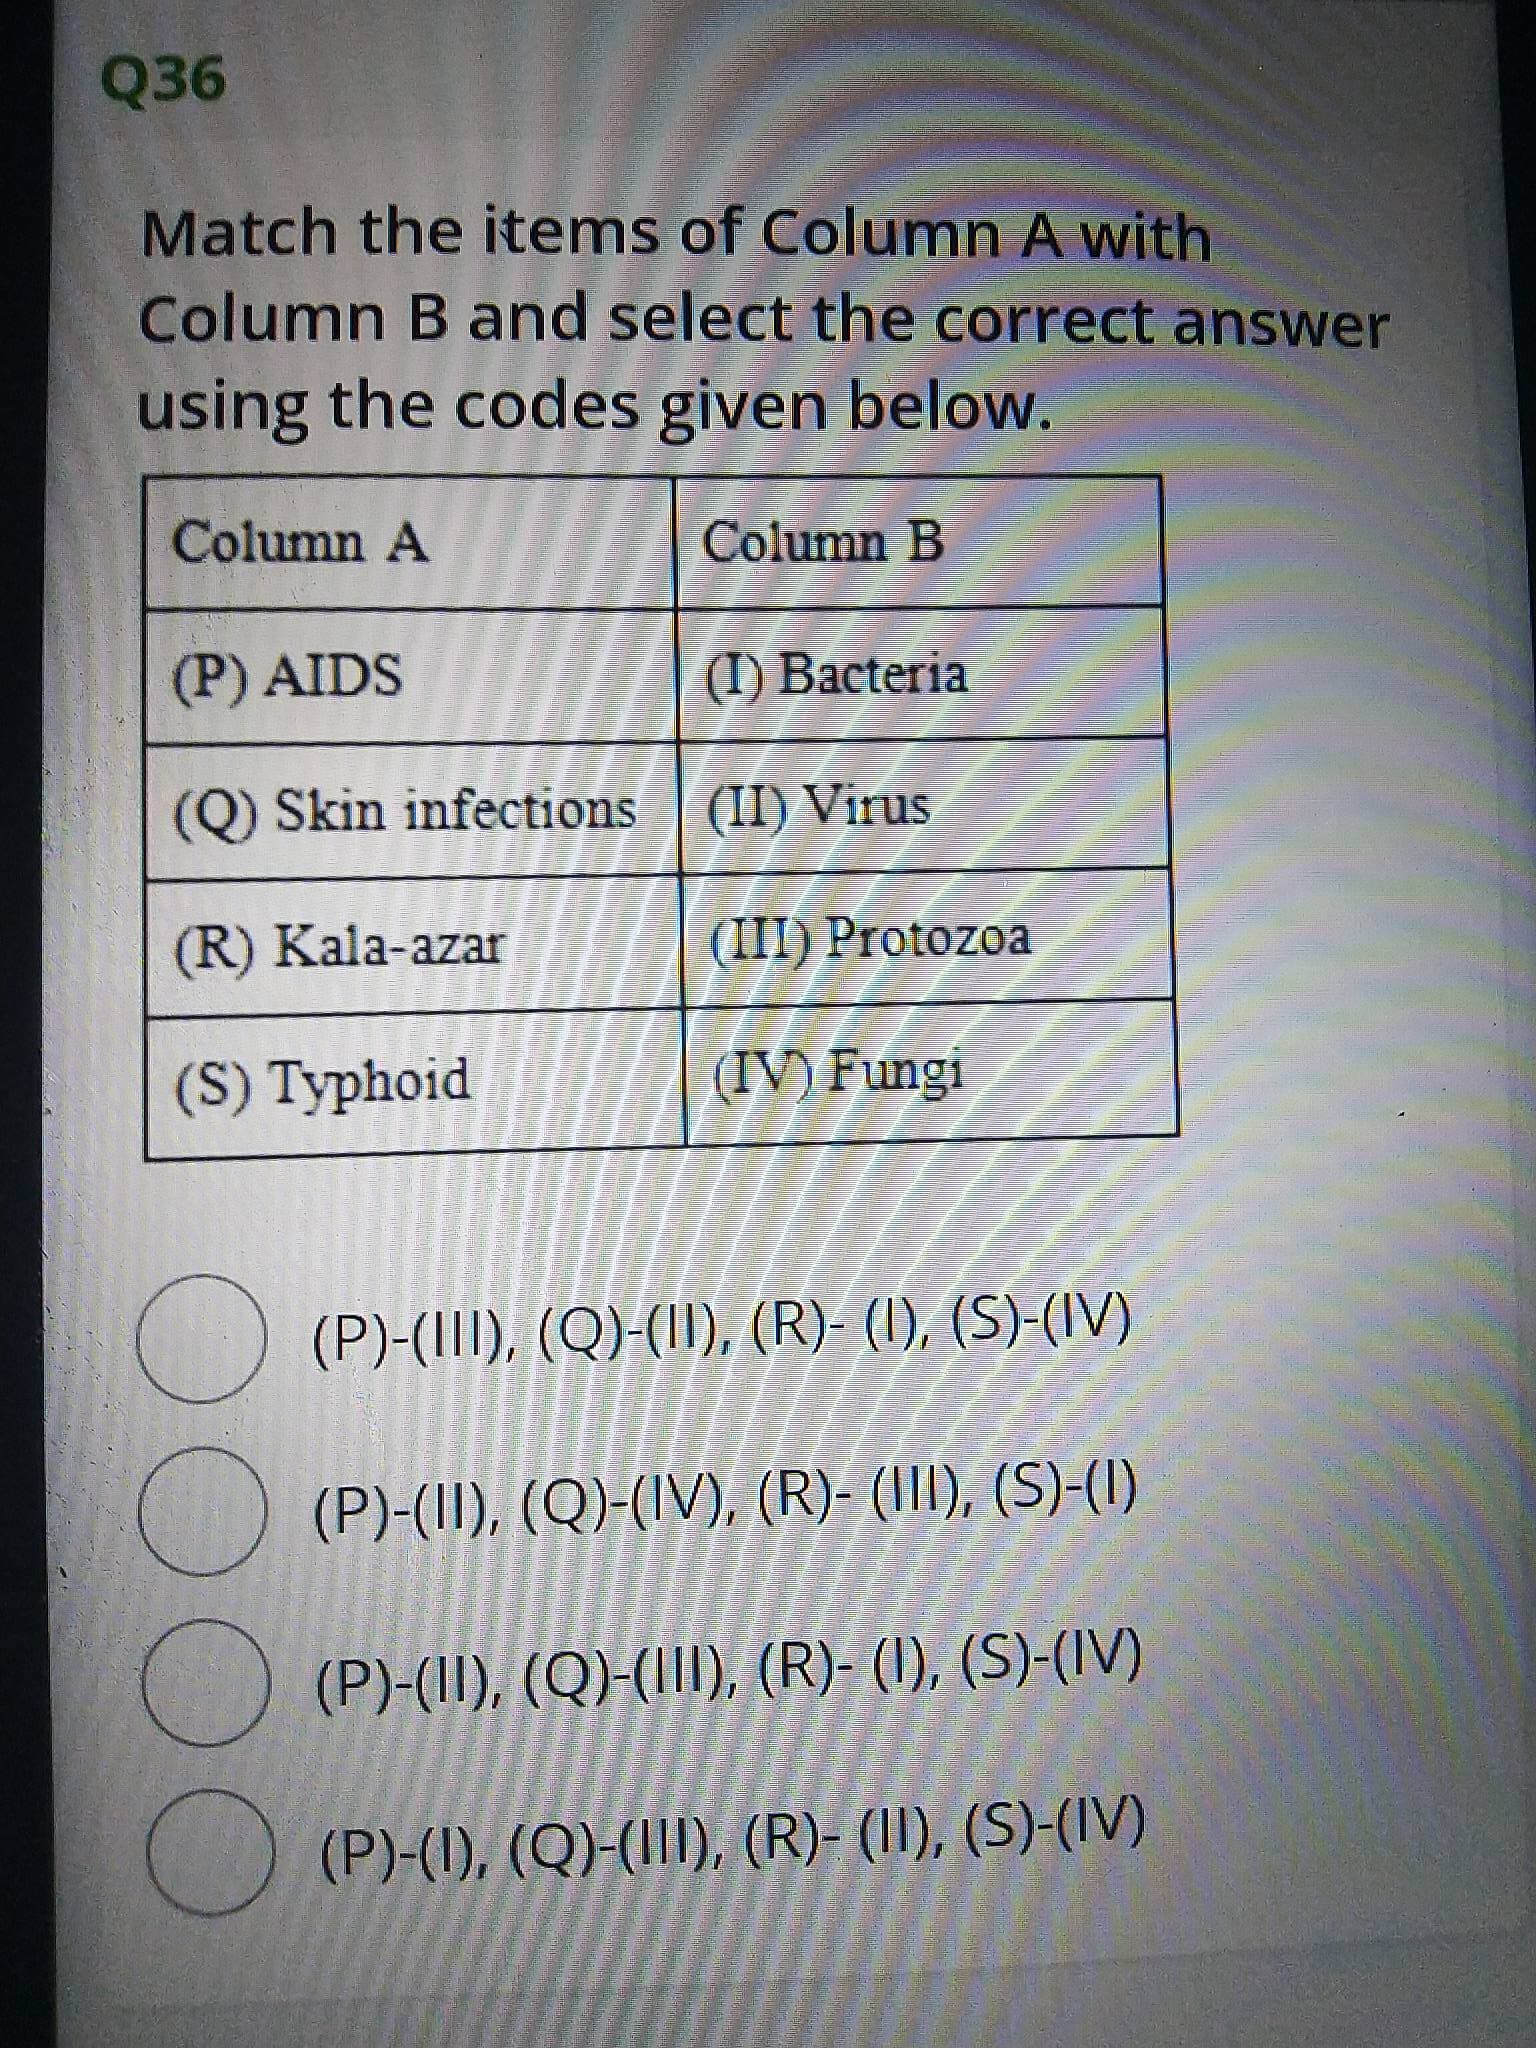 00OO
Q36
Match the items of Column A with
Column B and select the correct answer
using the codes given below.
Column A
Column B
(P) AIDS
(I) Bacteria
(Q) Skin infections (II) Virus
(R) Kala-azar
(III) Protozoa
(S) Typhoid
(IV) Fungi
(P)-(III), (Q)-(II), (R)- (I), (S)-(IV)
(P)-(II), (Q)-(IV), (R)- (III), (S)-(I)
(P)-(II), (Q)-(III), (R)- (I), (S)-(IV)
(P)-(1), (Q)-(III), (R)- (II), (S)-(IV)
